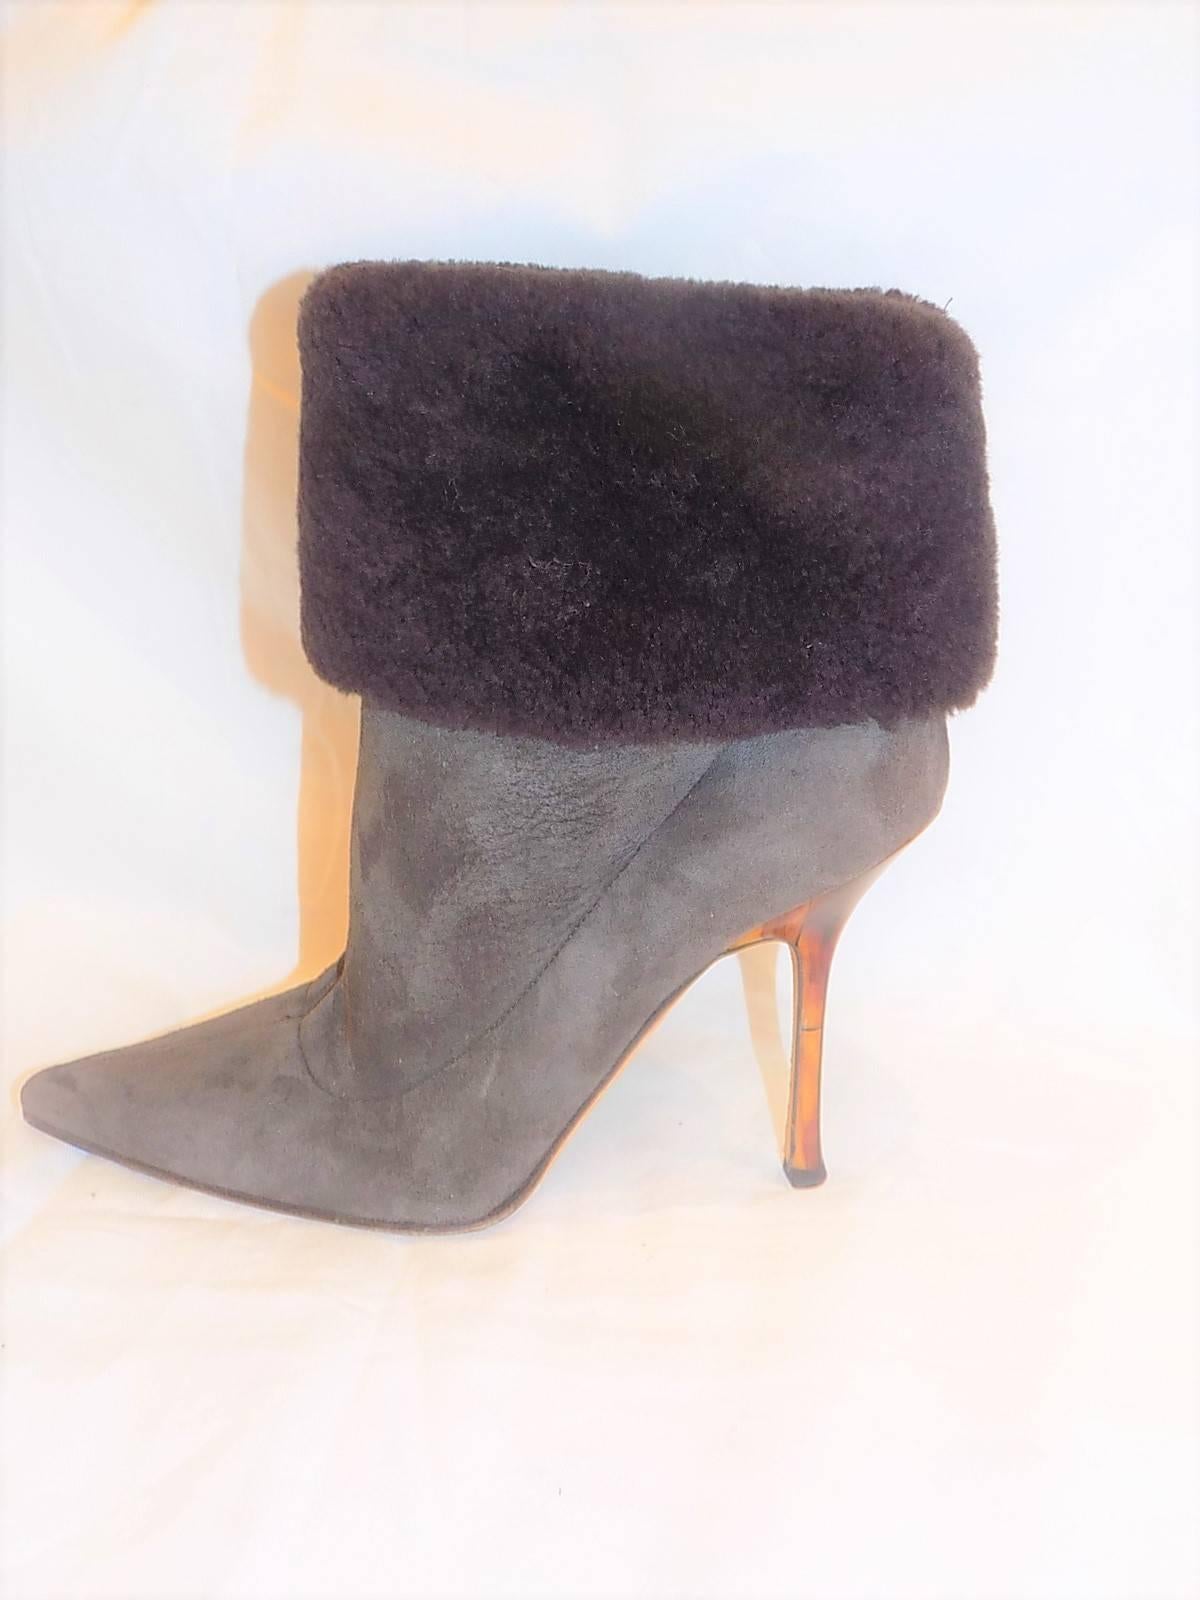 Women's Jimmy Choo ankle suede shearling boots sz 39 For Sale